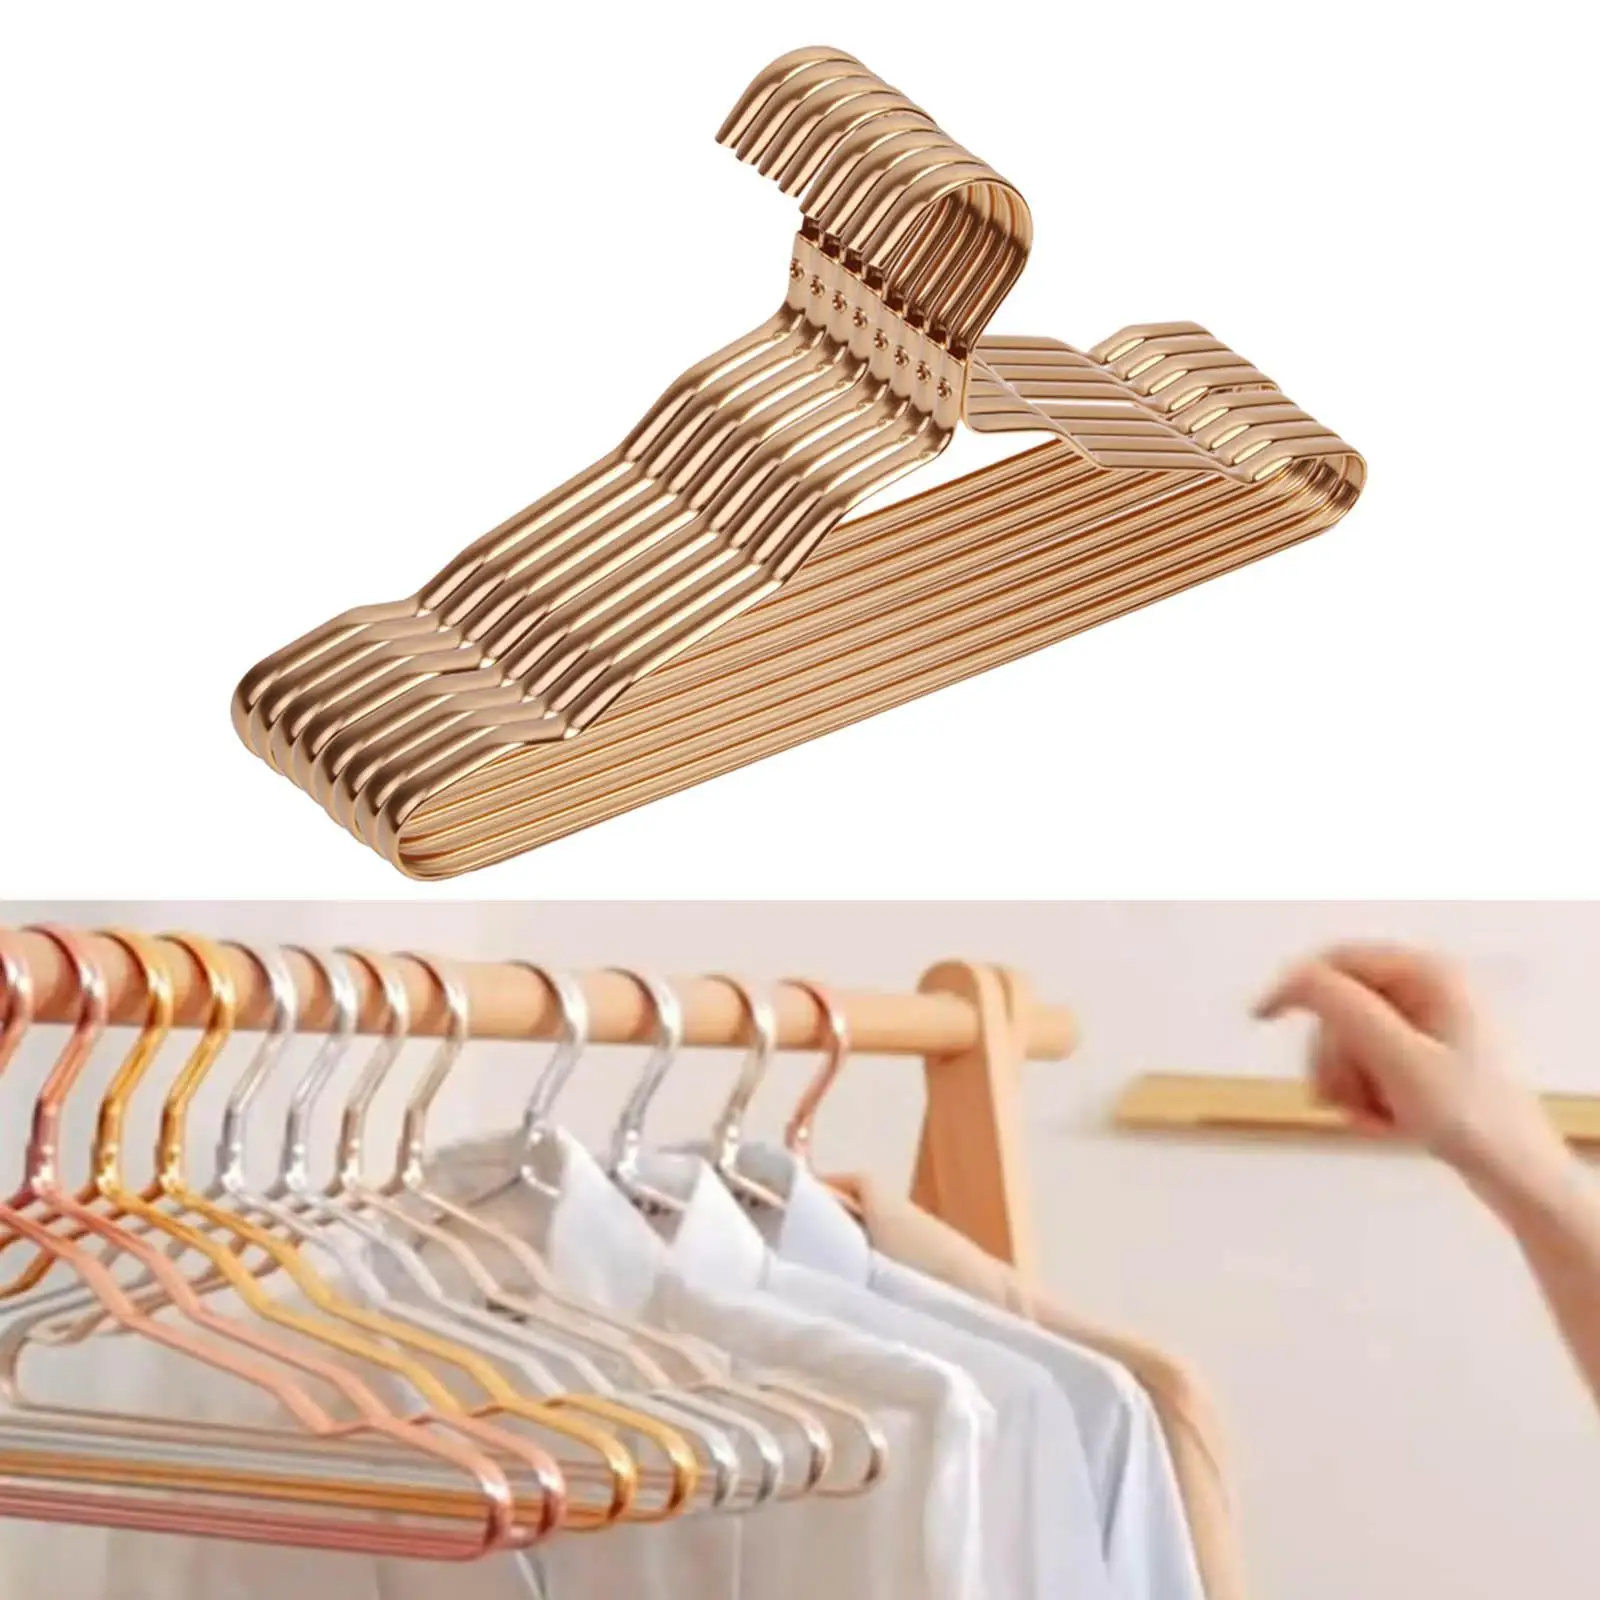 10x Clothes Hanger Seamless Drying Rack for Everyday Use Nursery Laundry